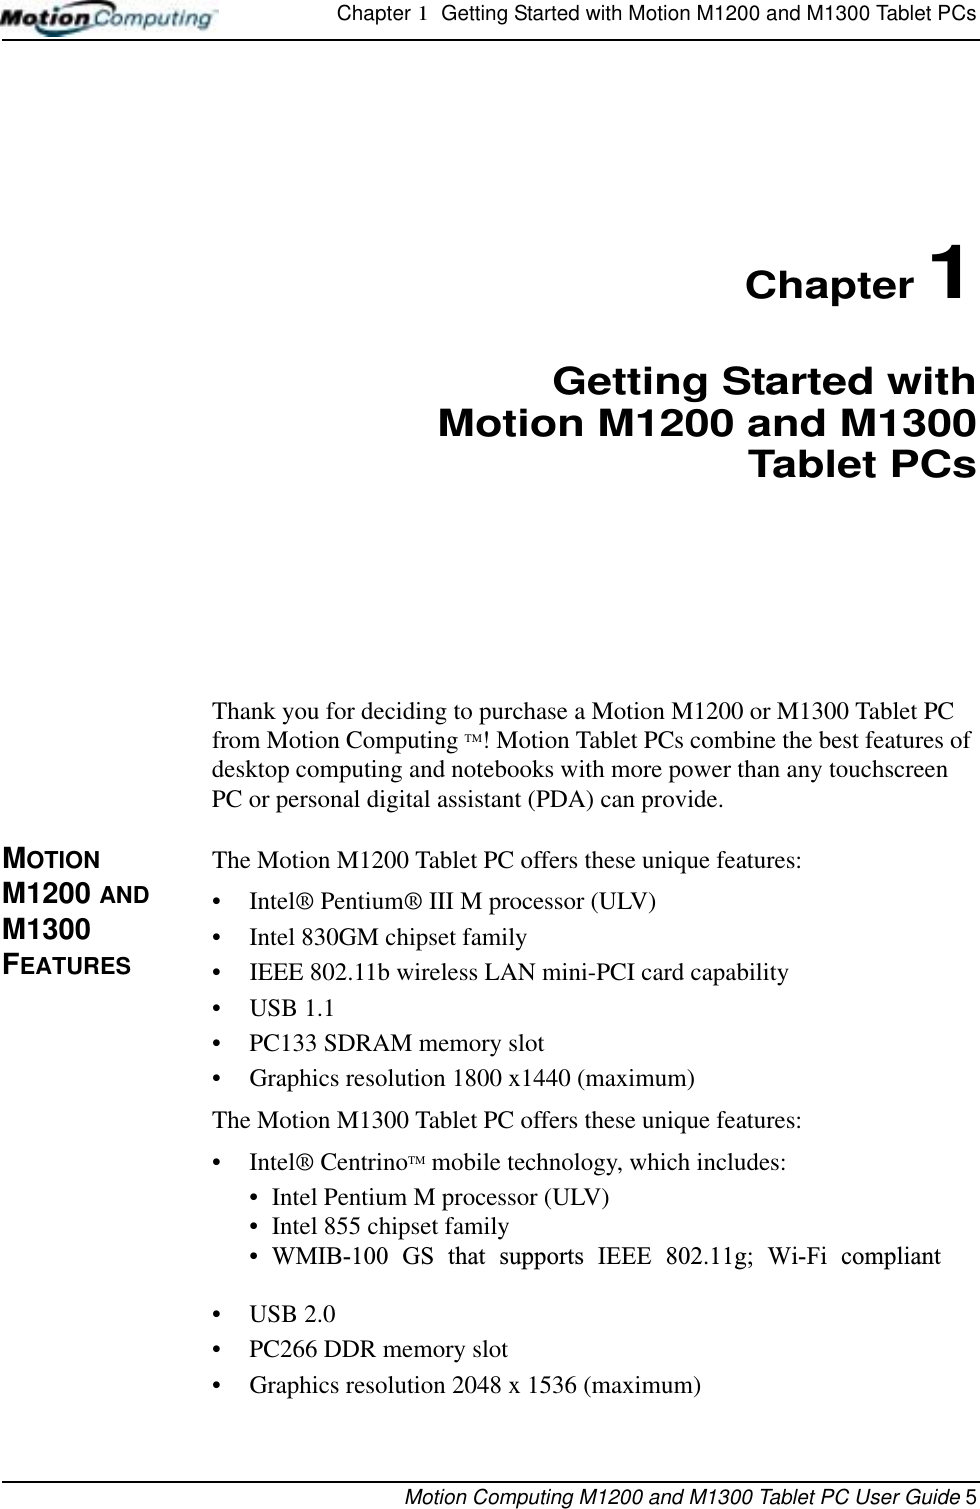 Chapter 1  Getting Started with Motion M1200 and M1300 Tablet PCsMotion Computing M1200 and M1300 Tablet PC User Guide 5Chapter 1Getting Started withMotion M1200 and M1300Tablet PCsThank you for deciding to purchase a Motion M1200 or M1300 Tablet PC from Motion Computing TM! Motion Tablet PCs combine the best features of desktop computing and notebooks with more power than any touchscreen PC or personal digital assistant (PDA) can provide.MOTION M1200 AND M1300 FEATURESThe Motion M1200 Tablet PC offers these unique features:•Intel® Pentium® III M processor (ULV)• Intel 830GM chipset family• IEEE 802.11b wireless LAN mini-PCI card capability• USB 1.1• PC133 SDRAM memory slot• Graphics resolution 1800 x1440 (maximum)The Motion M1300 Tablet PC offers these unique features:•Intel® CentrinoTM mobile technology, which includes:• Intel Pentium M processor (ULV)• Intel 855 chipset family• WMIB-100 GS that supports IEEE 802.11g; Wi-Fi compliant• USB 2.0• PC266 DDR memory slot• Graphics resolution 2048 x 1536 (maximum)